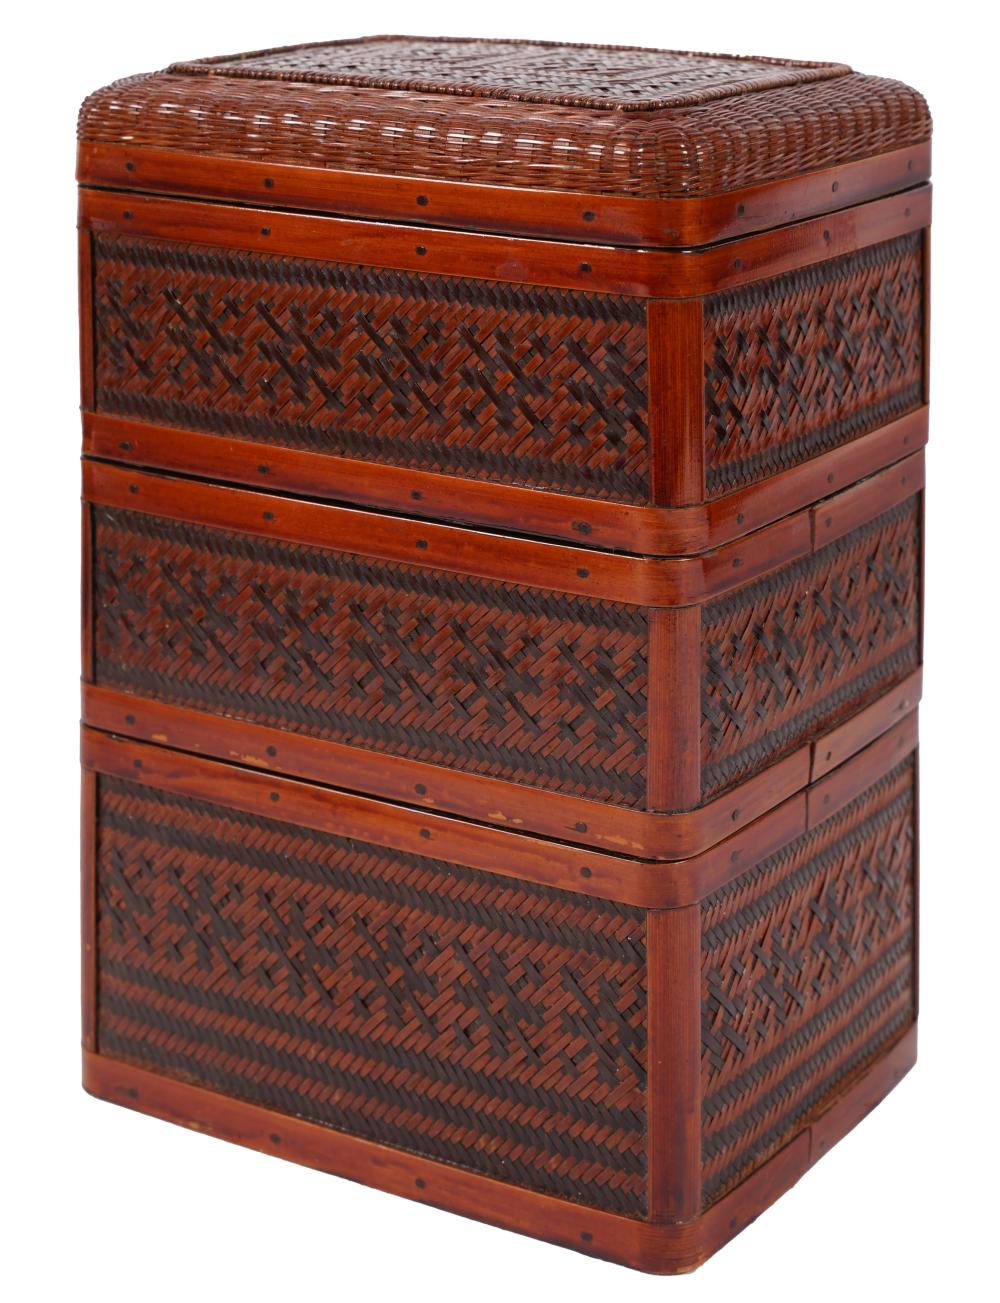 CHINESE LACQUERED WOOD AND WICKER